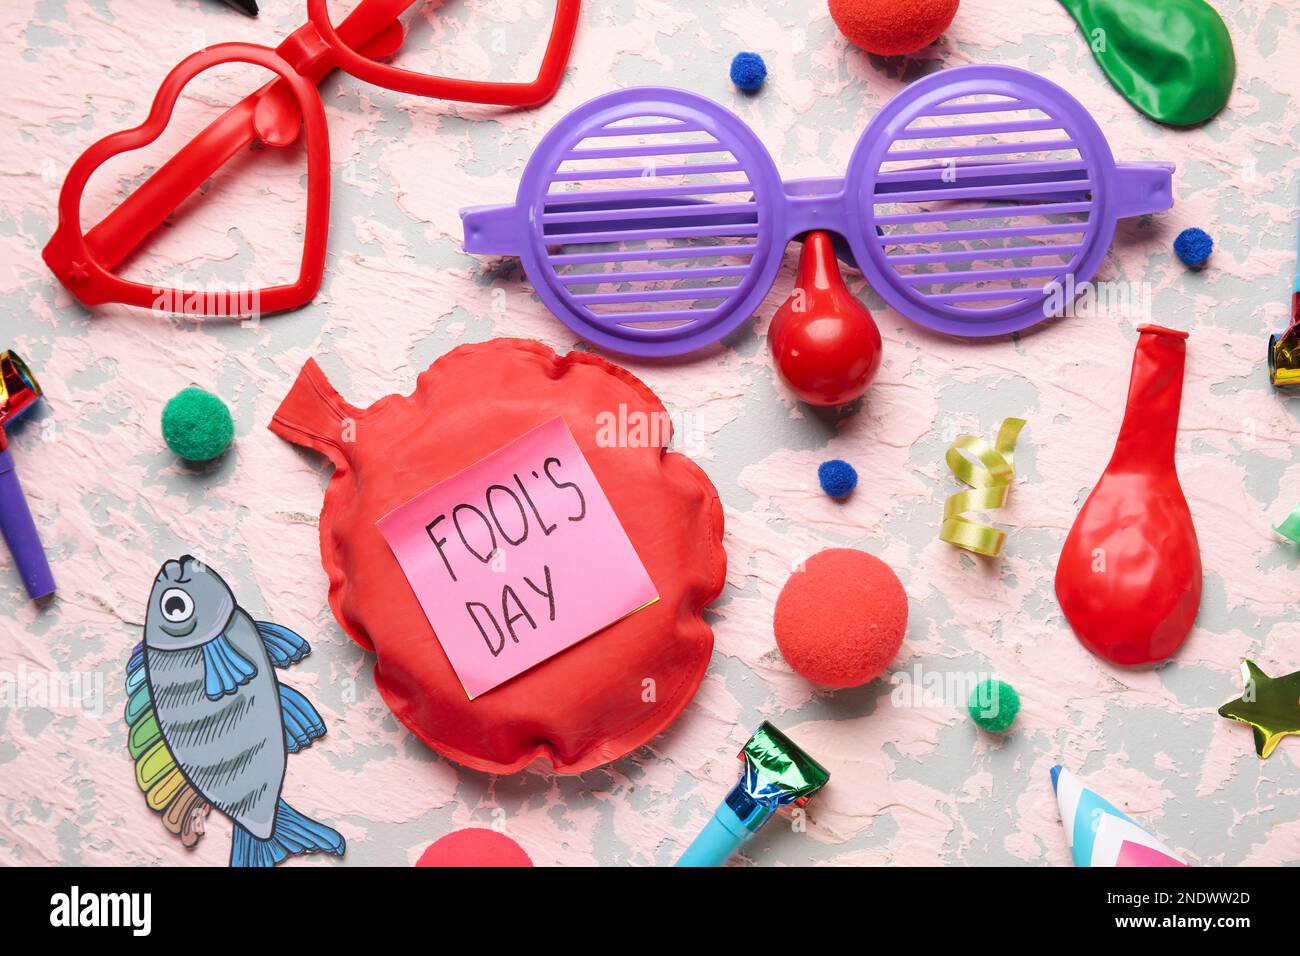 Sticky paper with text FOOL'S DAY, whoopee cushion and party decor on grunge background Stock Photo